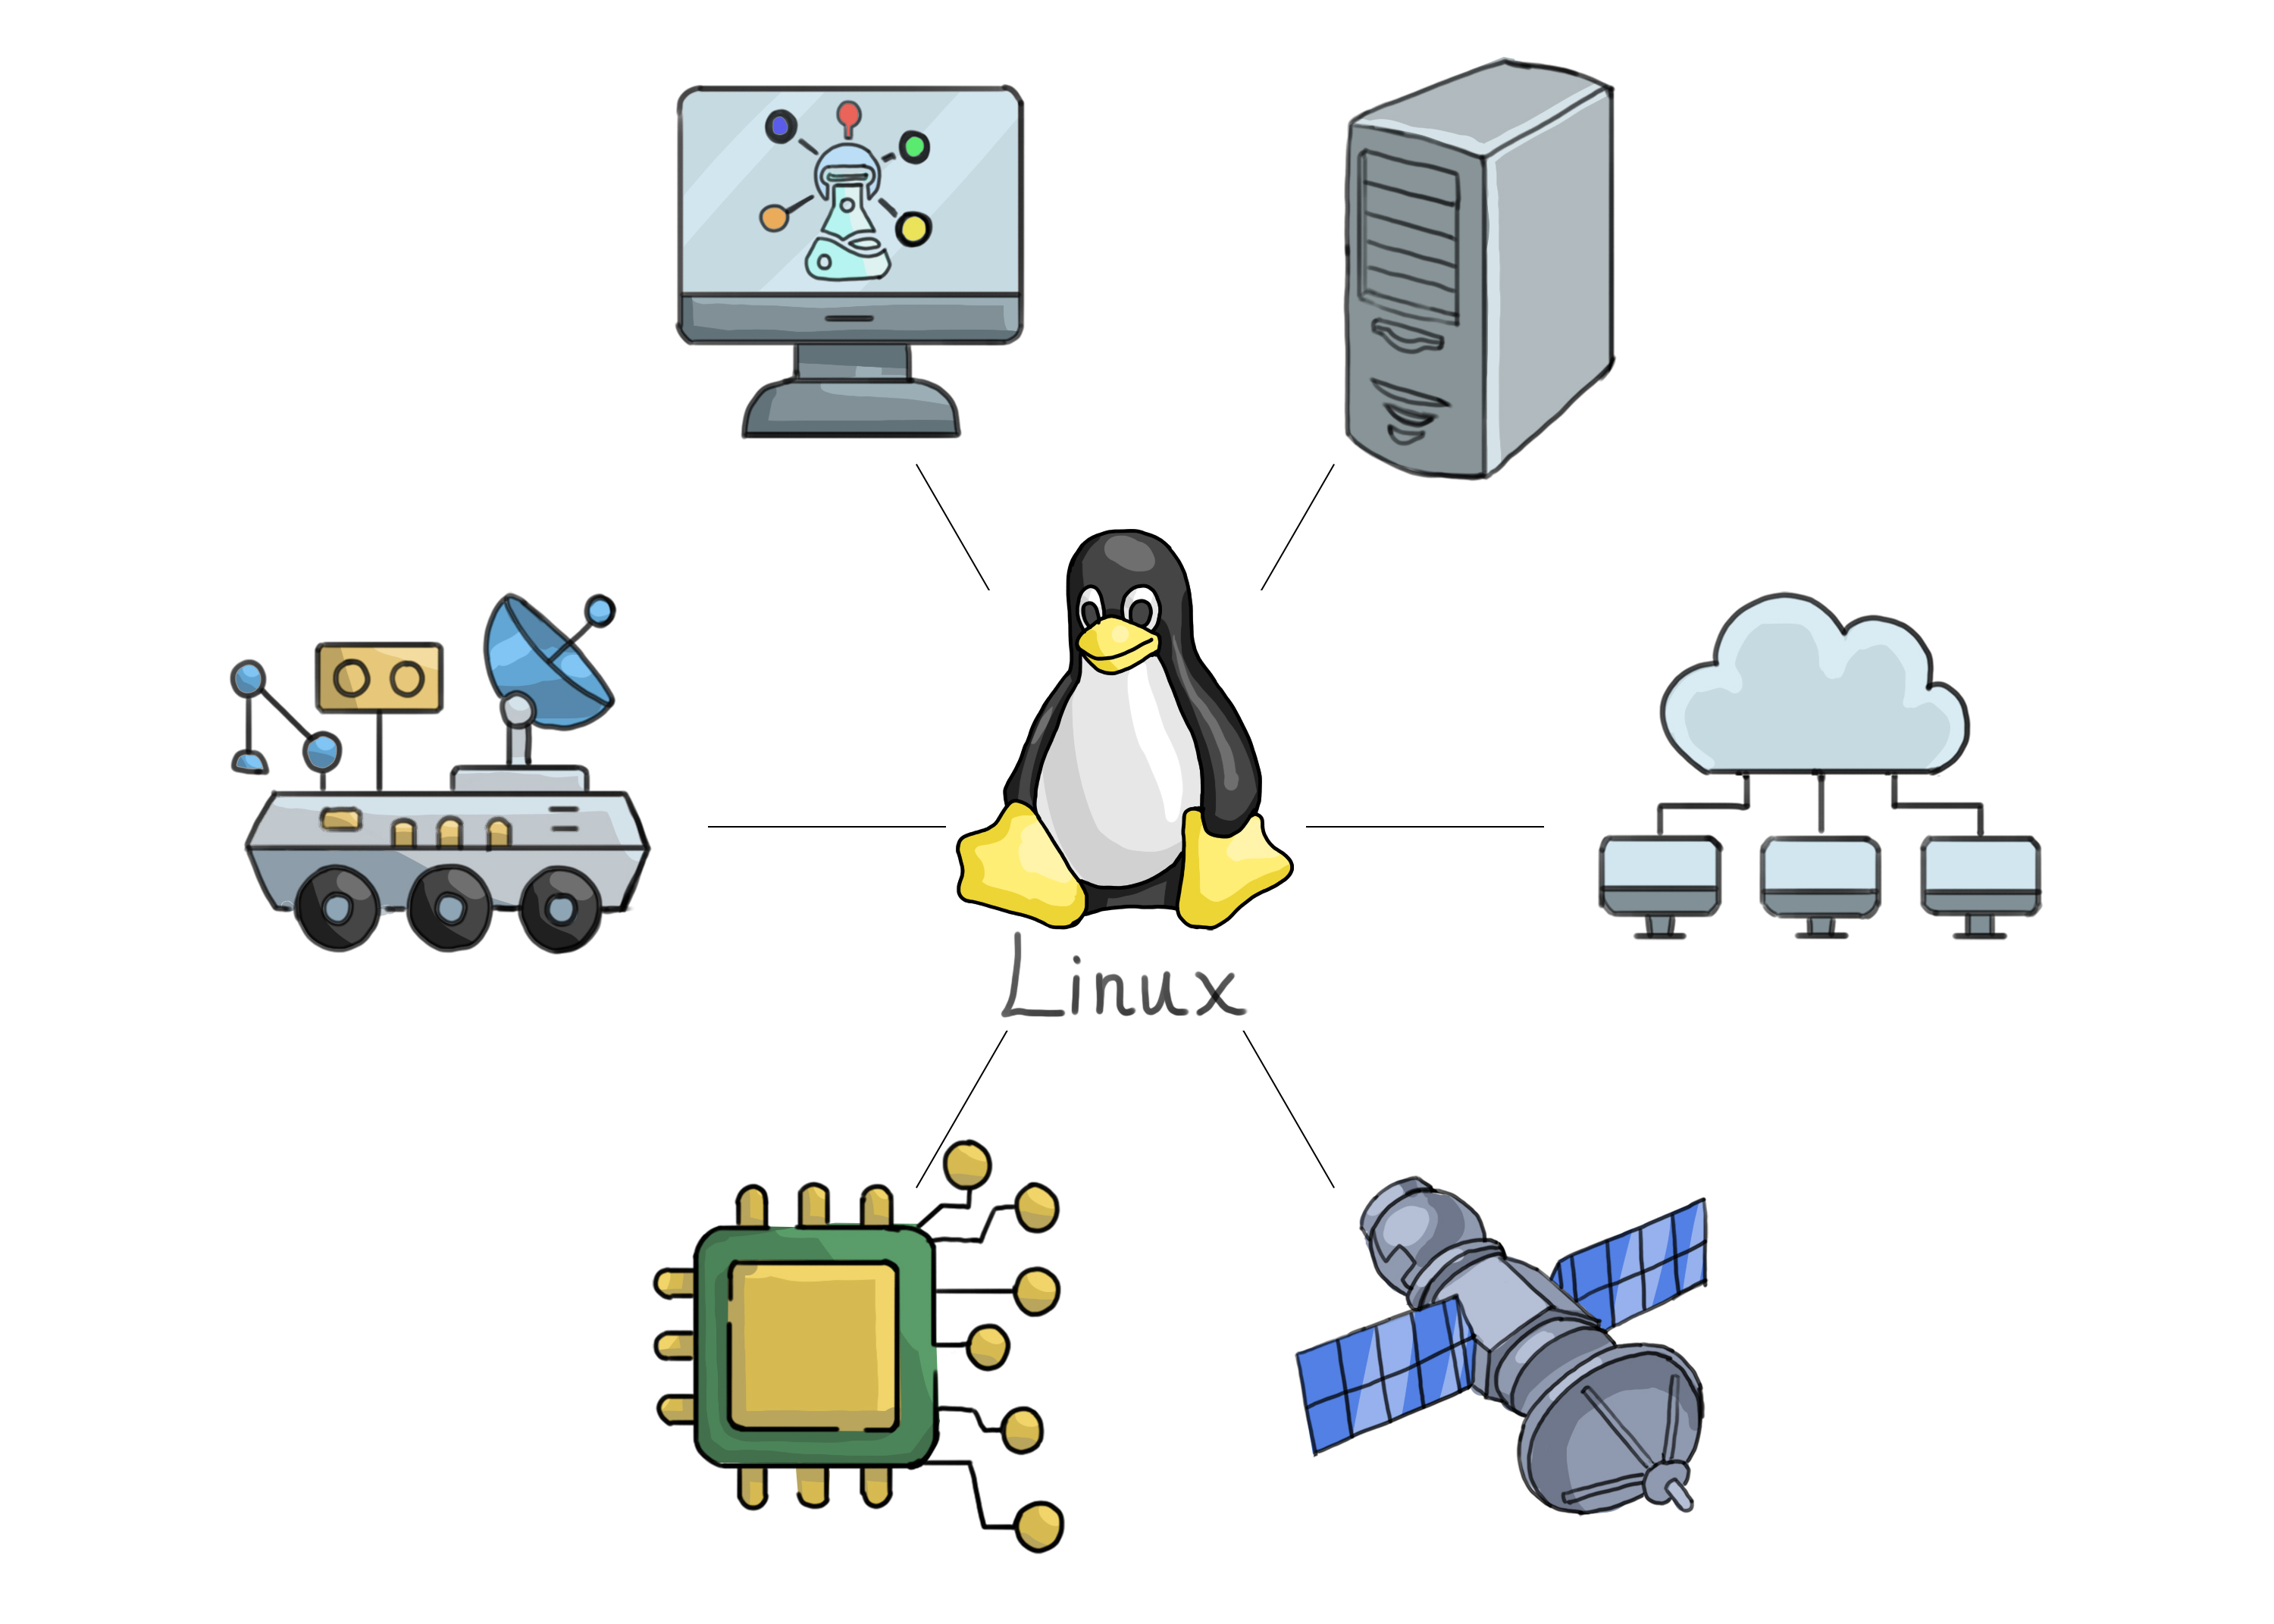 Linux is everywhere